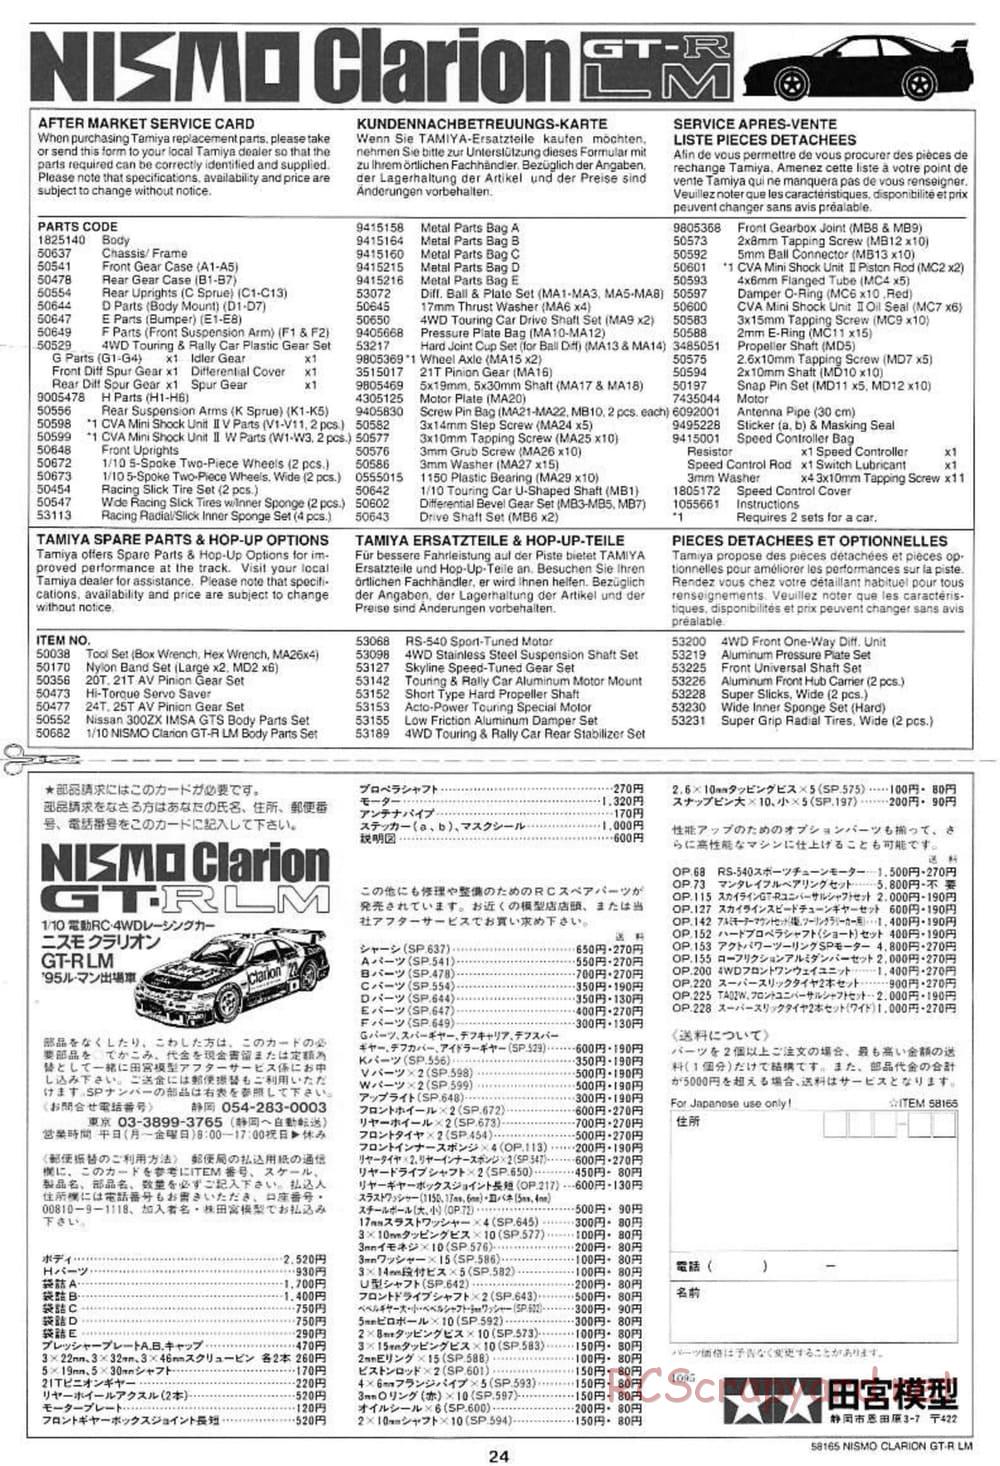 Tamiya - Nismo Clarion GT-R LM - TA-02W Chassis - Manual - Page 24